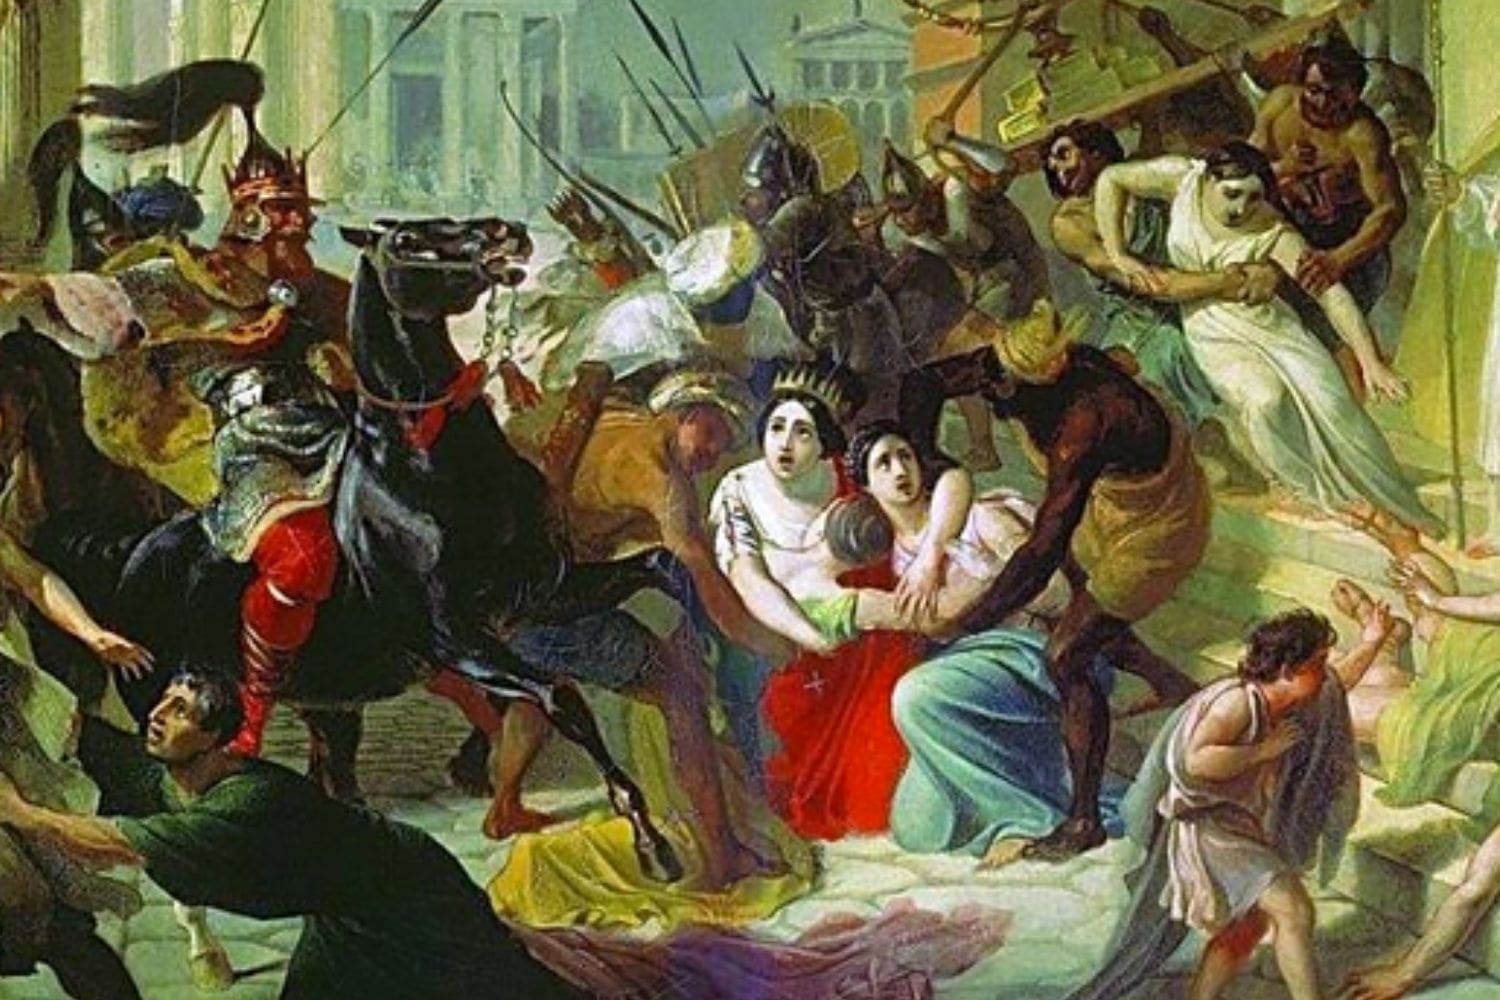 Painting of the fall of the Roman Empire